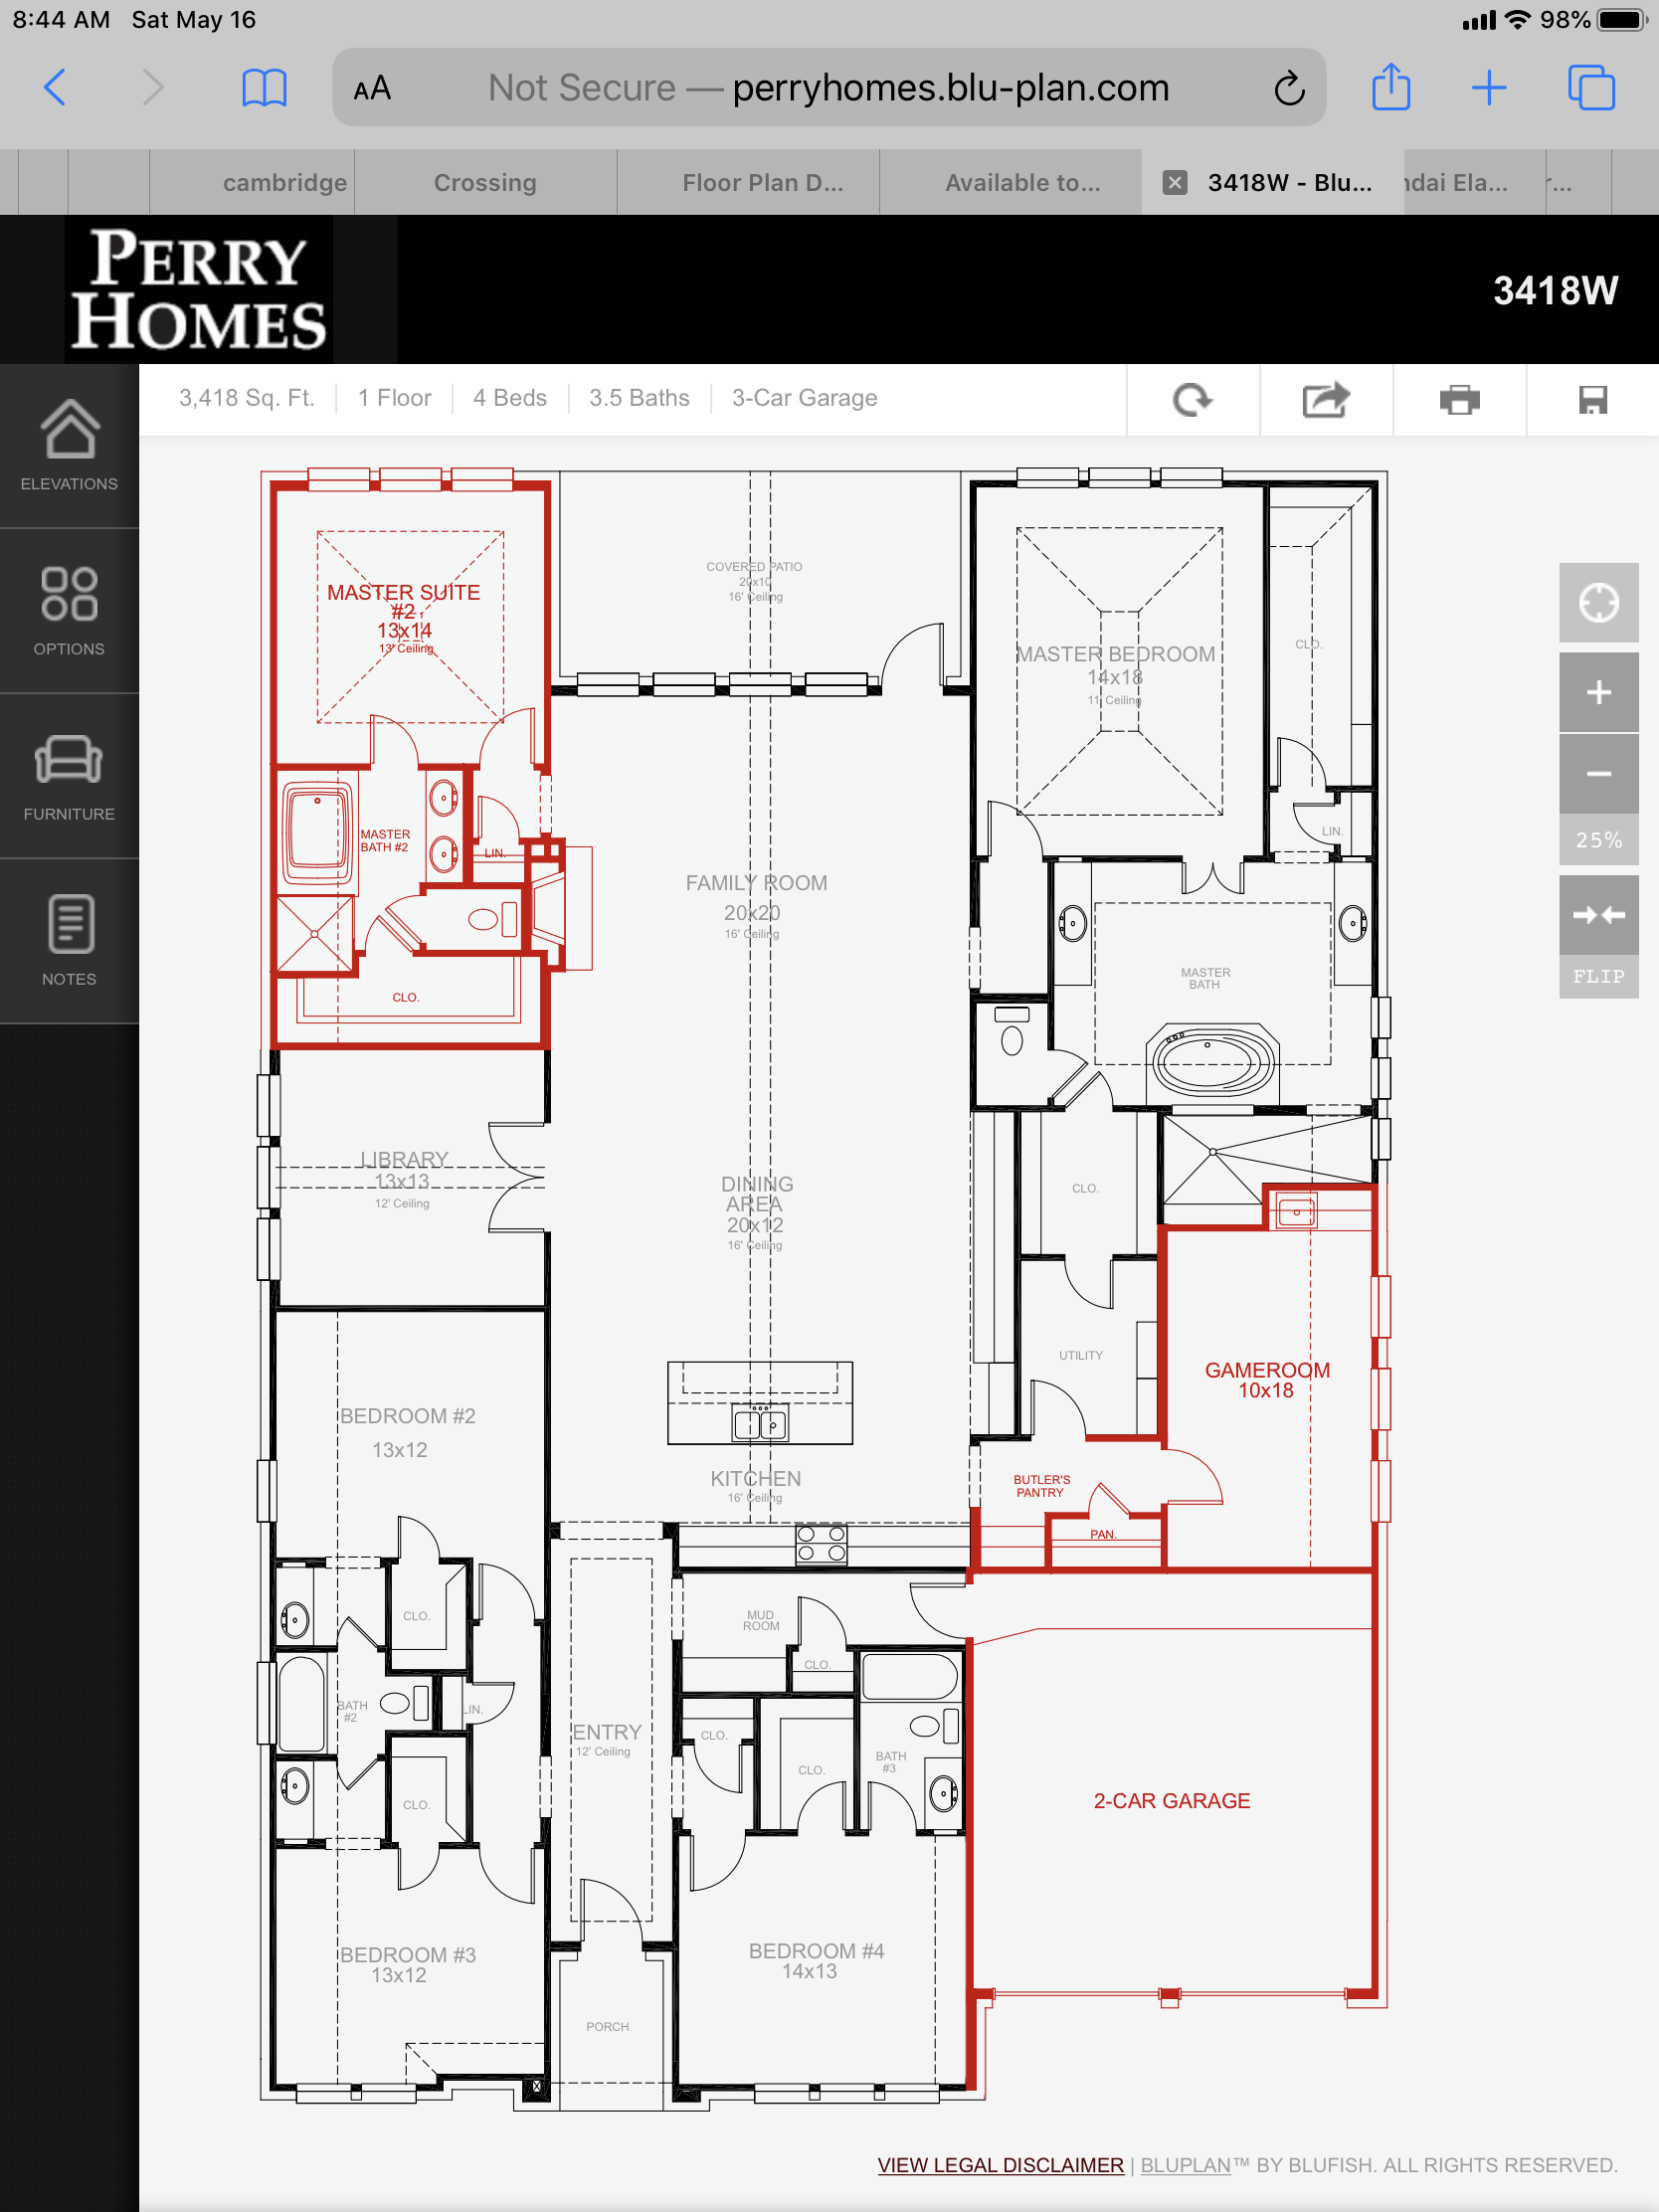 Pin by Rhonda Kirk on House plans in 2020 House plans